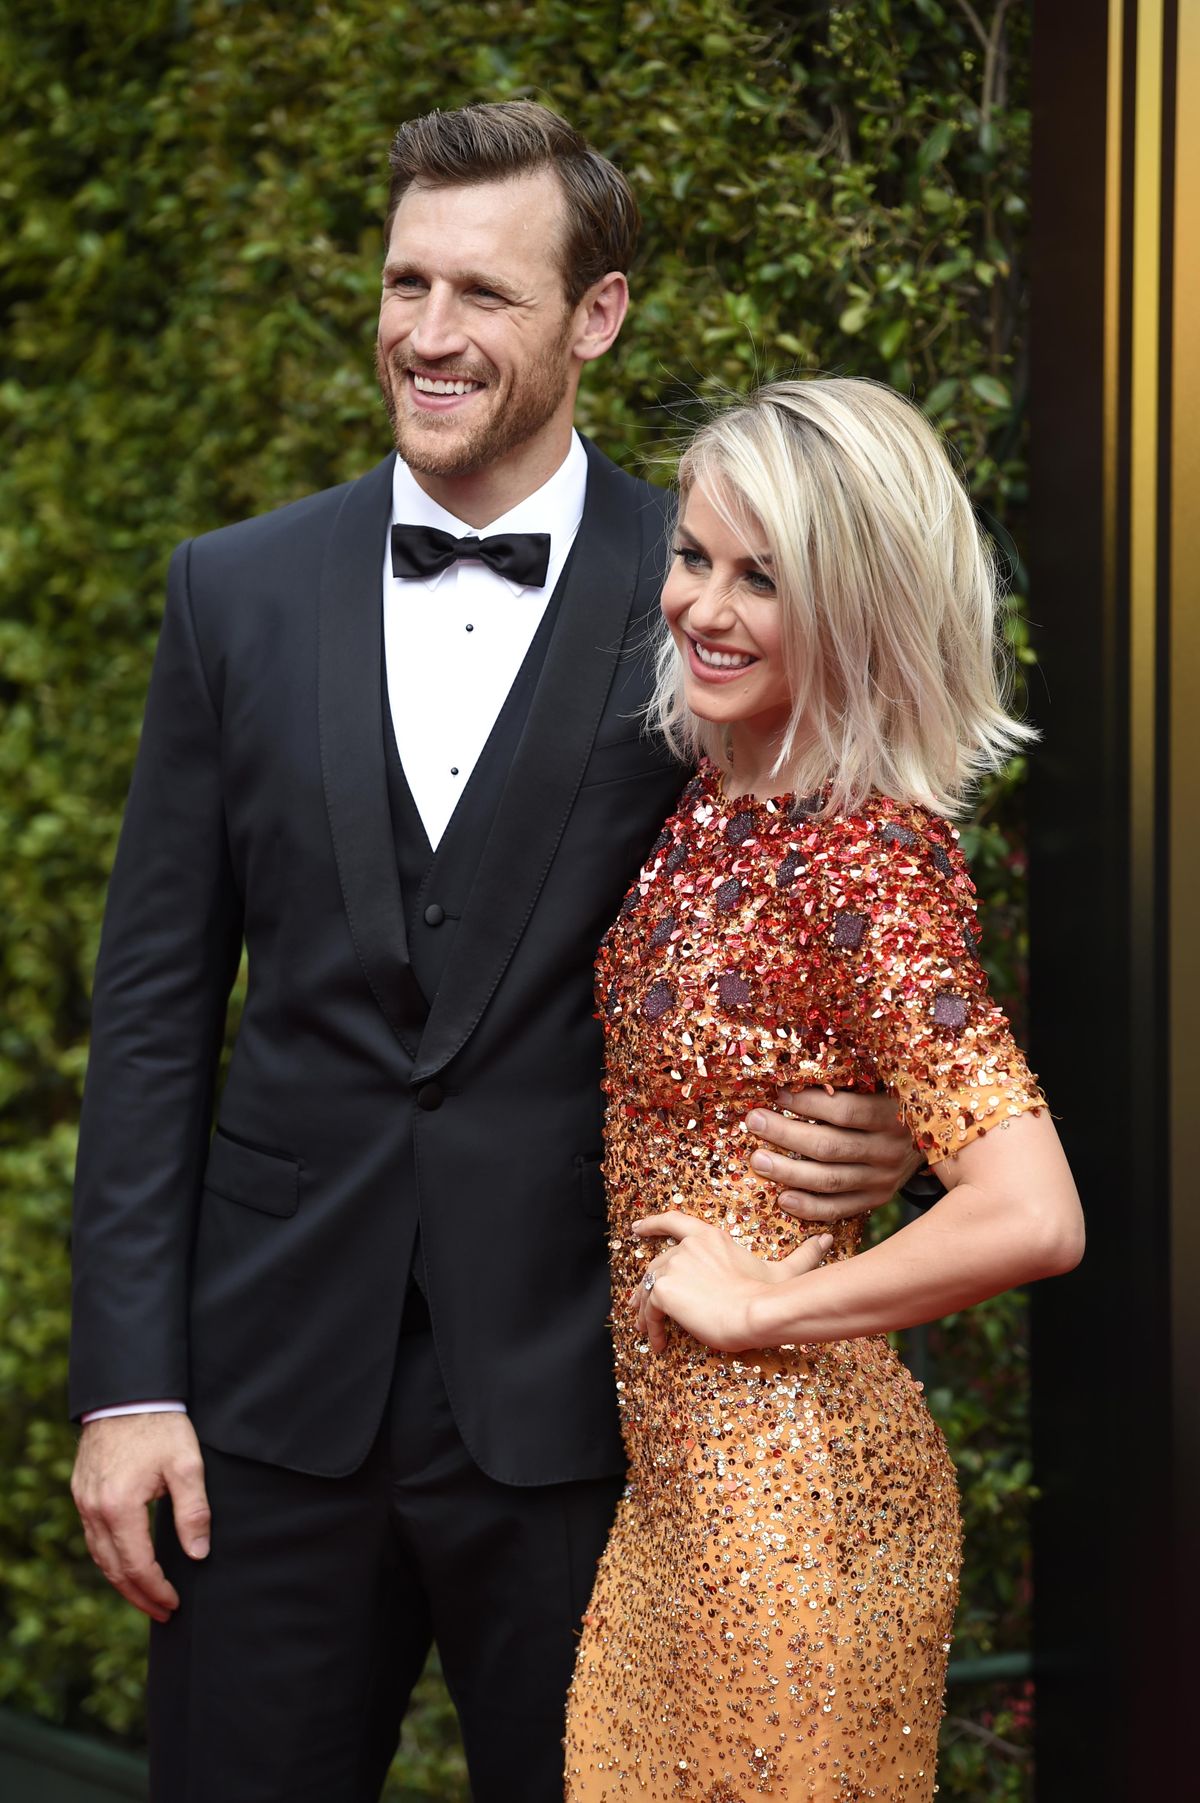 Brooks Laich, left, and Julianne Hough arrive at the Creative Arts Emmy Awards at the Microsoft Theater in Los Angeles in this file photo from Sept. 12, 2015. (Chris Pizzello / Chris Pizzello/Invision/AP)